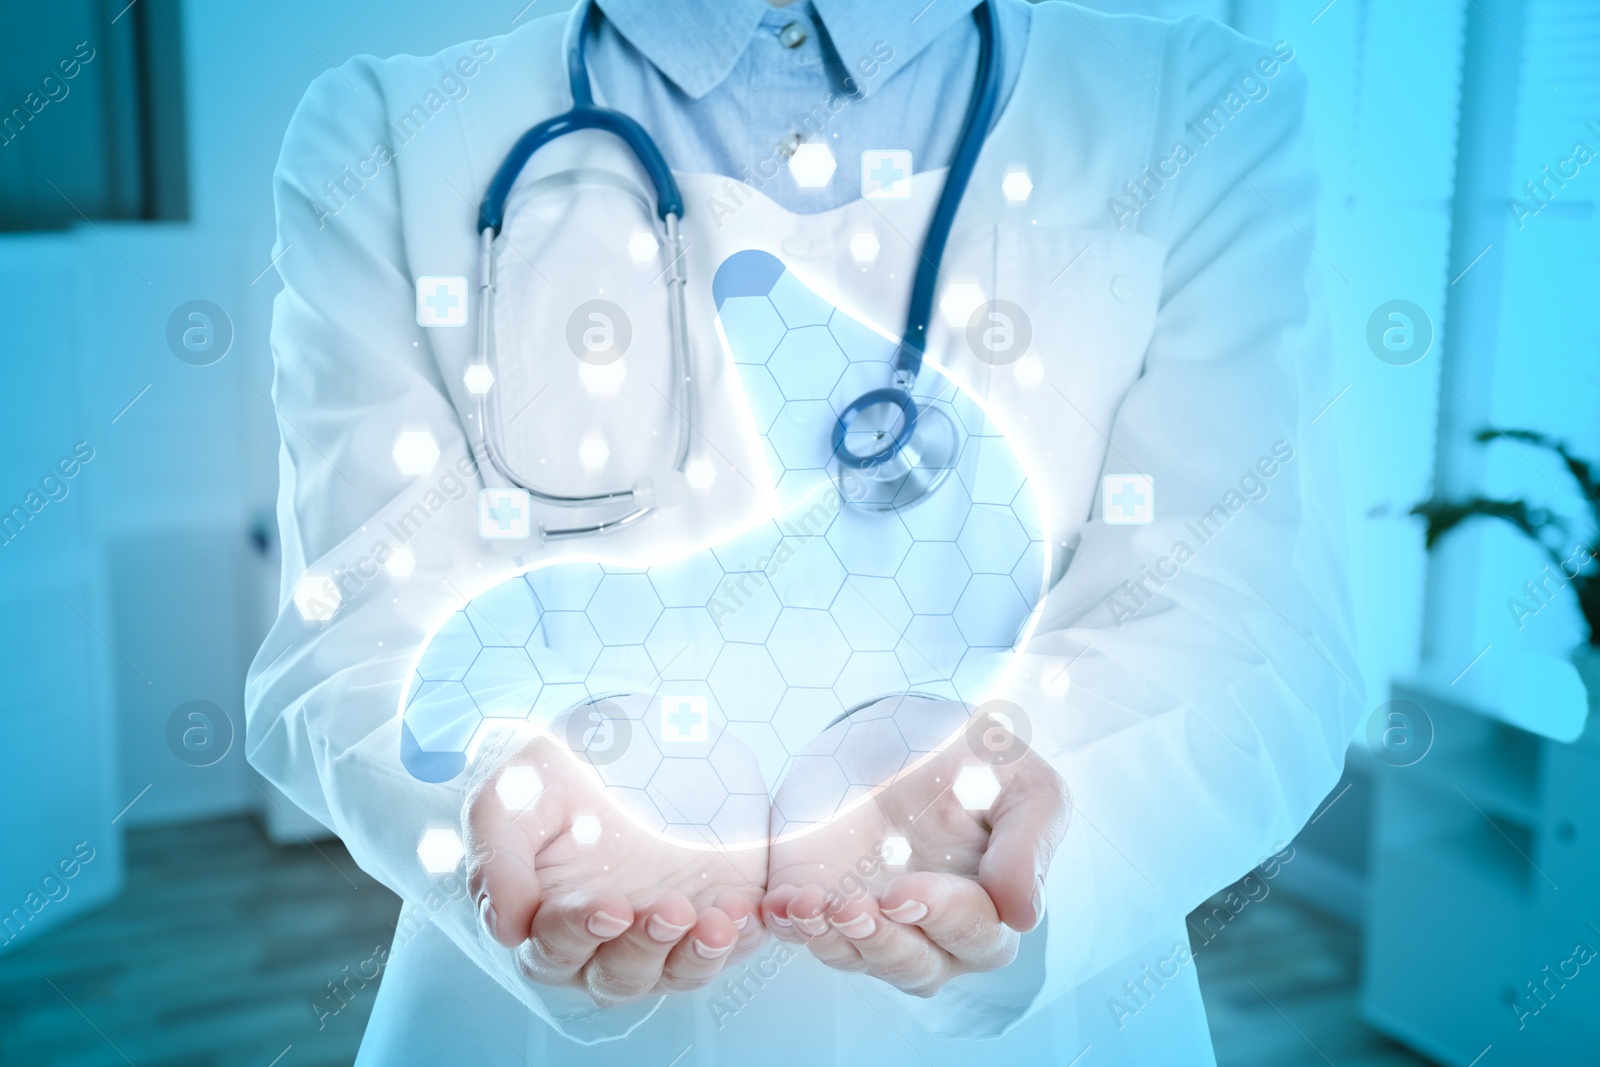 Image of Gastroenterologist holding virtual image of stomach indoors, closeup